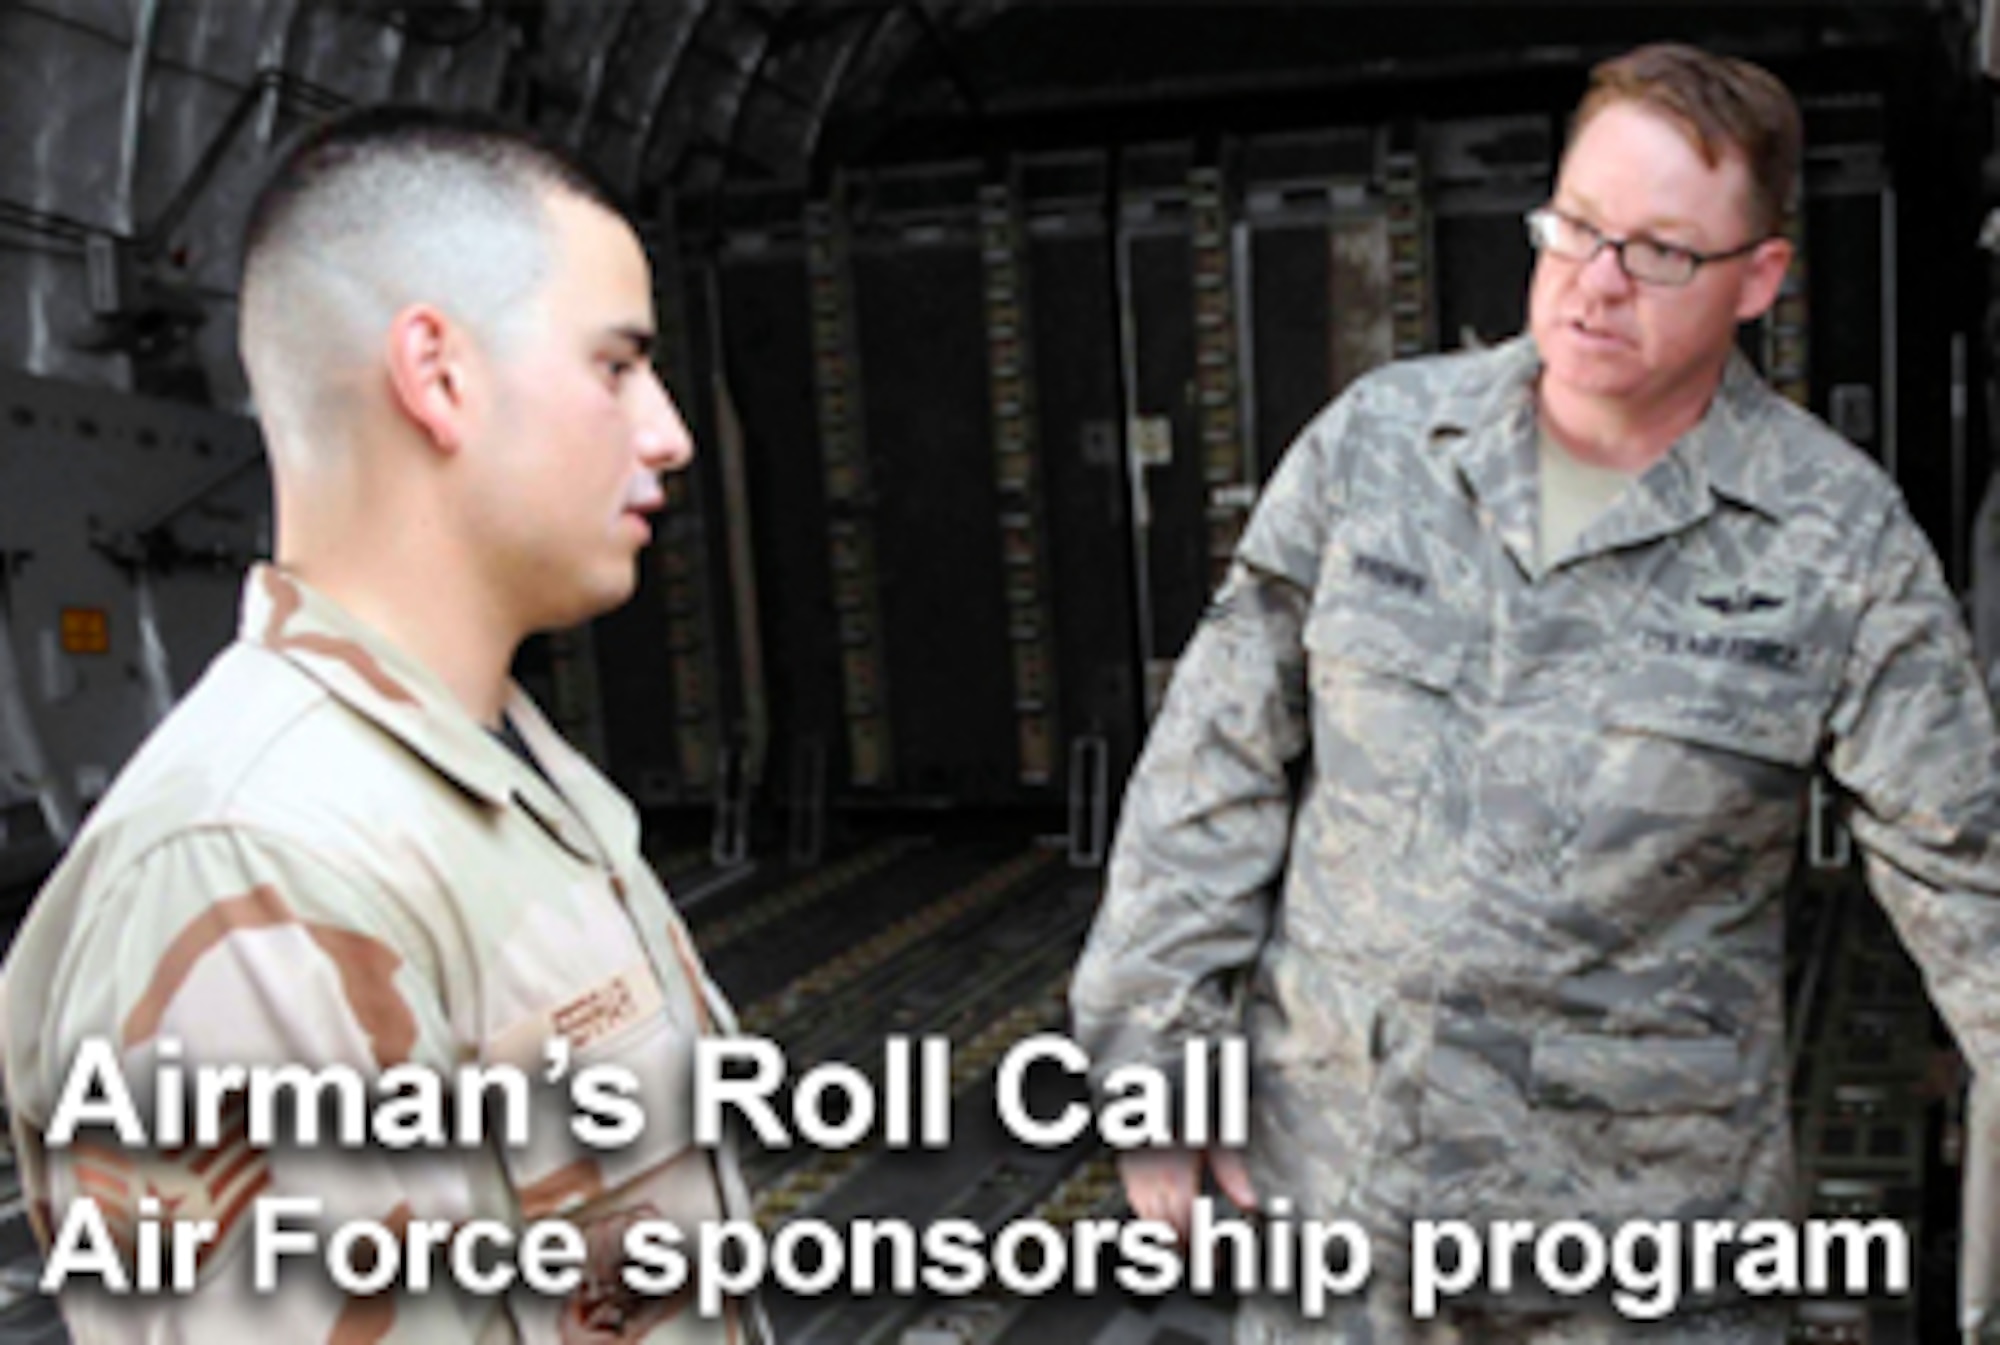 The sponsorship program is part of the Air Force Individualized Newcomer Treatment and Orientation program, or INTRO, which is designed to facilitate permanent change of station moves by welcoming and assisting newly arrived Airmen and their families. This week's Airman's Roll Call focuses on sponsorship and the benefits Airmen and their families have when moving to a new location. (U.S. Air Force illustration/Mike Carabajal) 